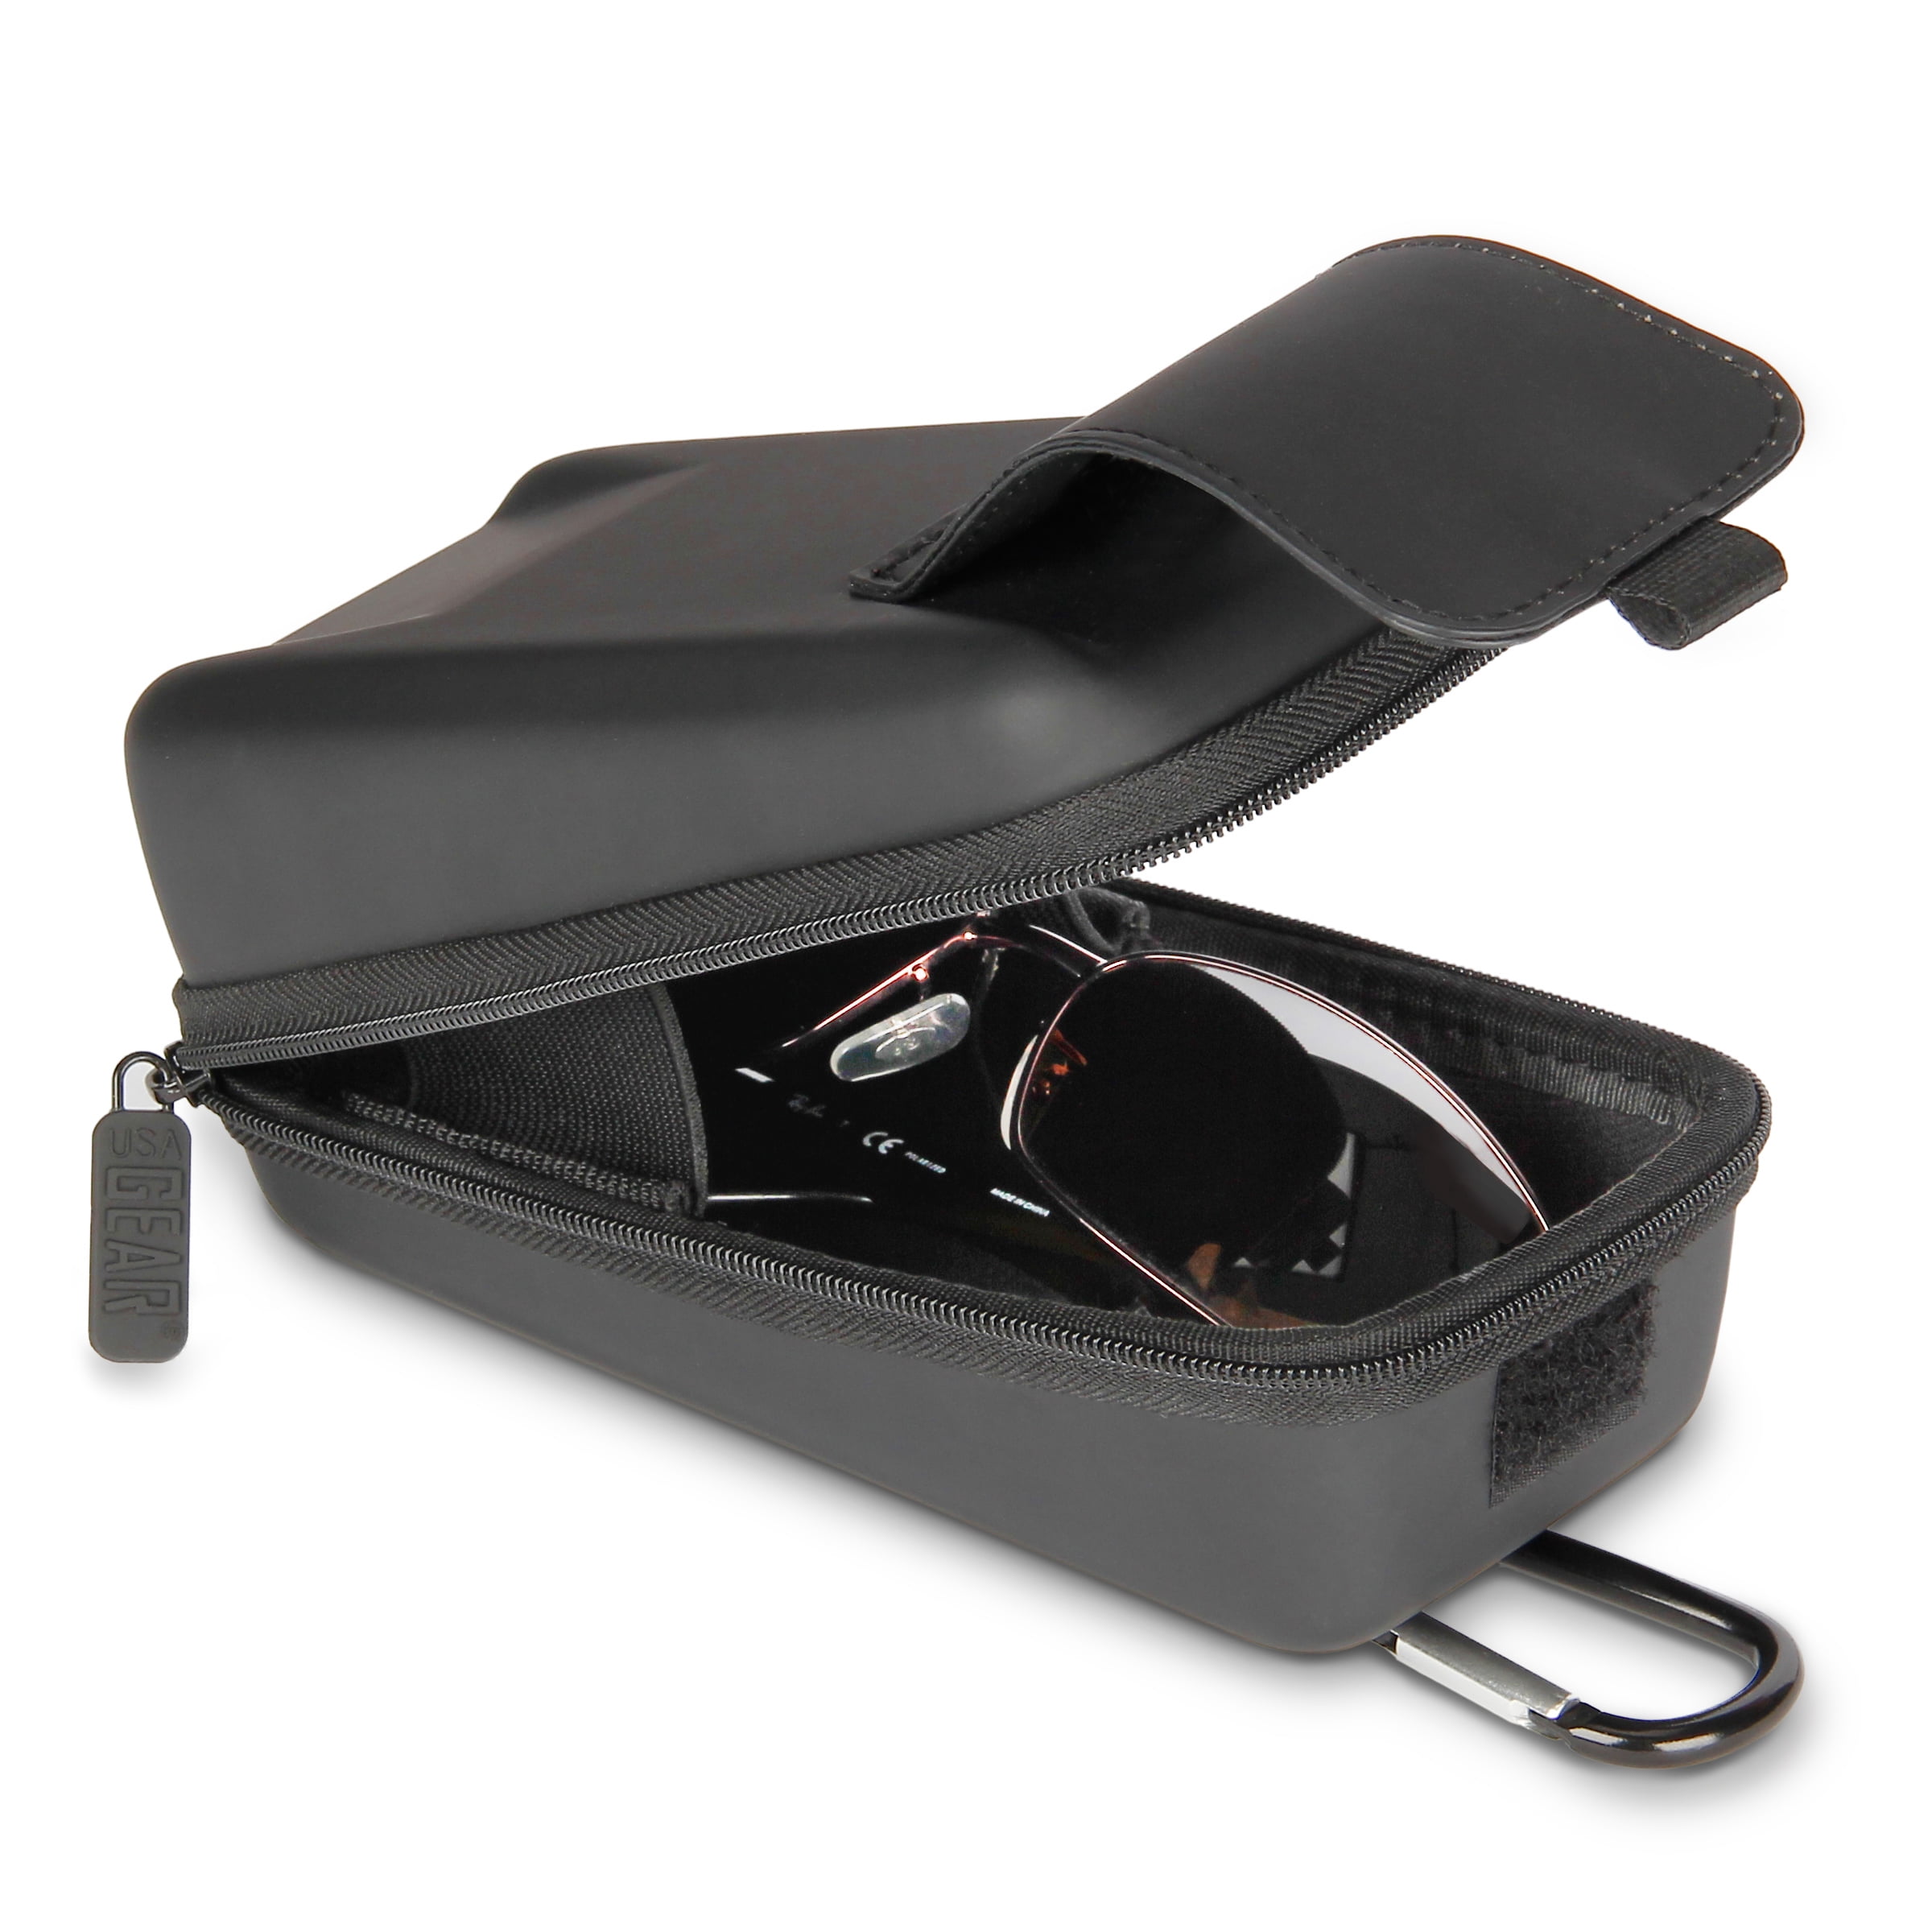 Southwest Works with Most Brands of Glasses Soft Sunglasses and Eye Glasses Case for Men & Women by USA Gear Scratch Resistant Protective Pouch with Travel Belt Loop and Carabiner Clip